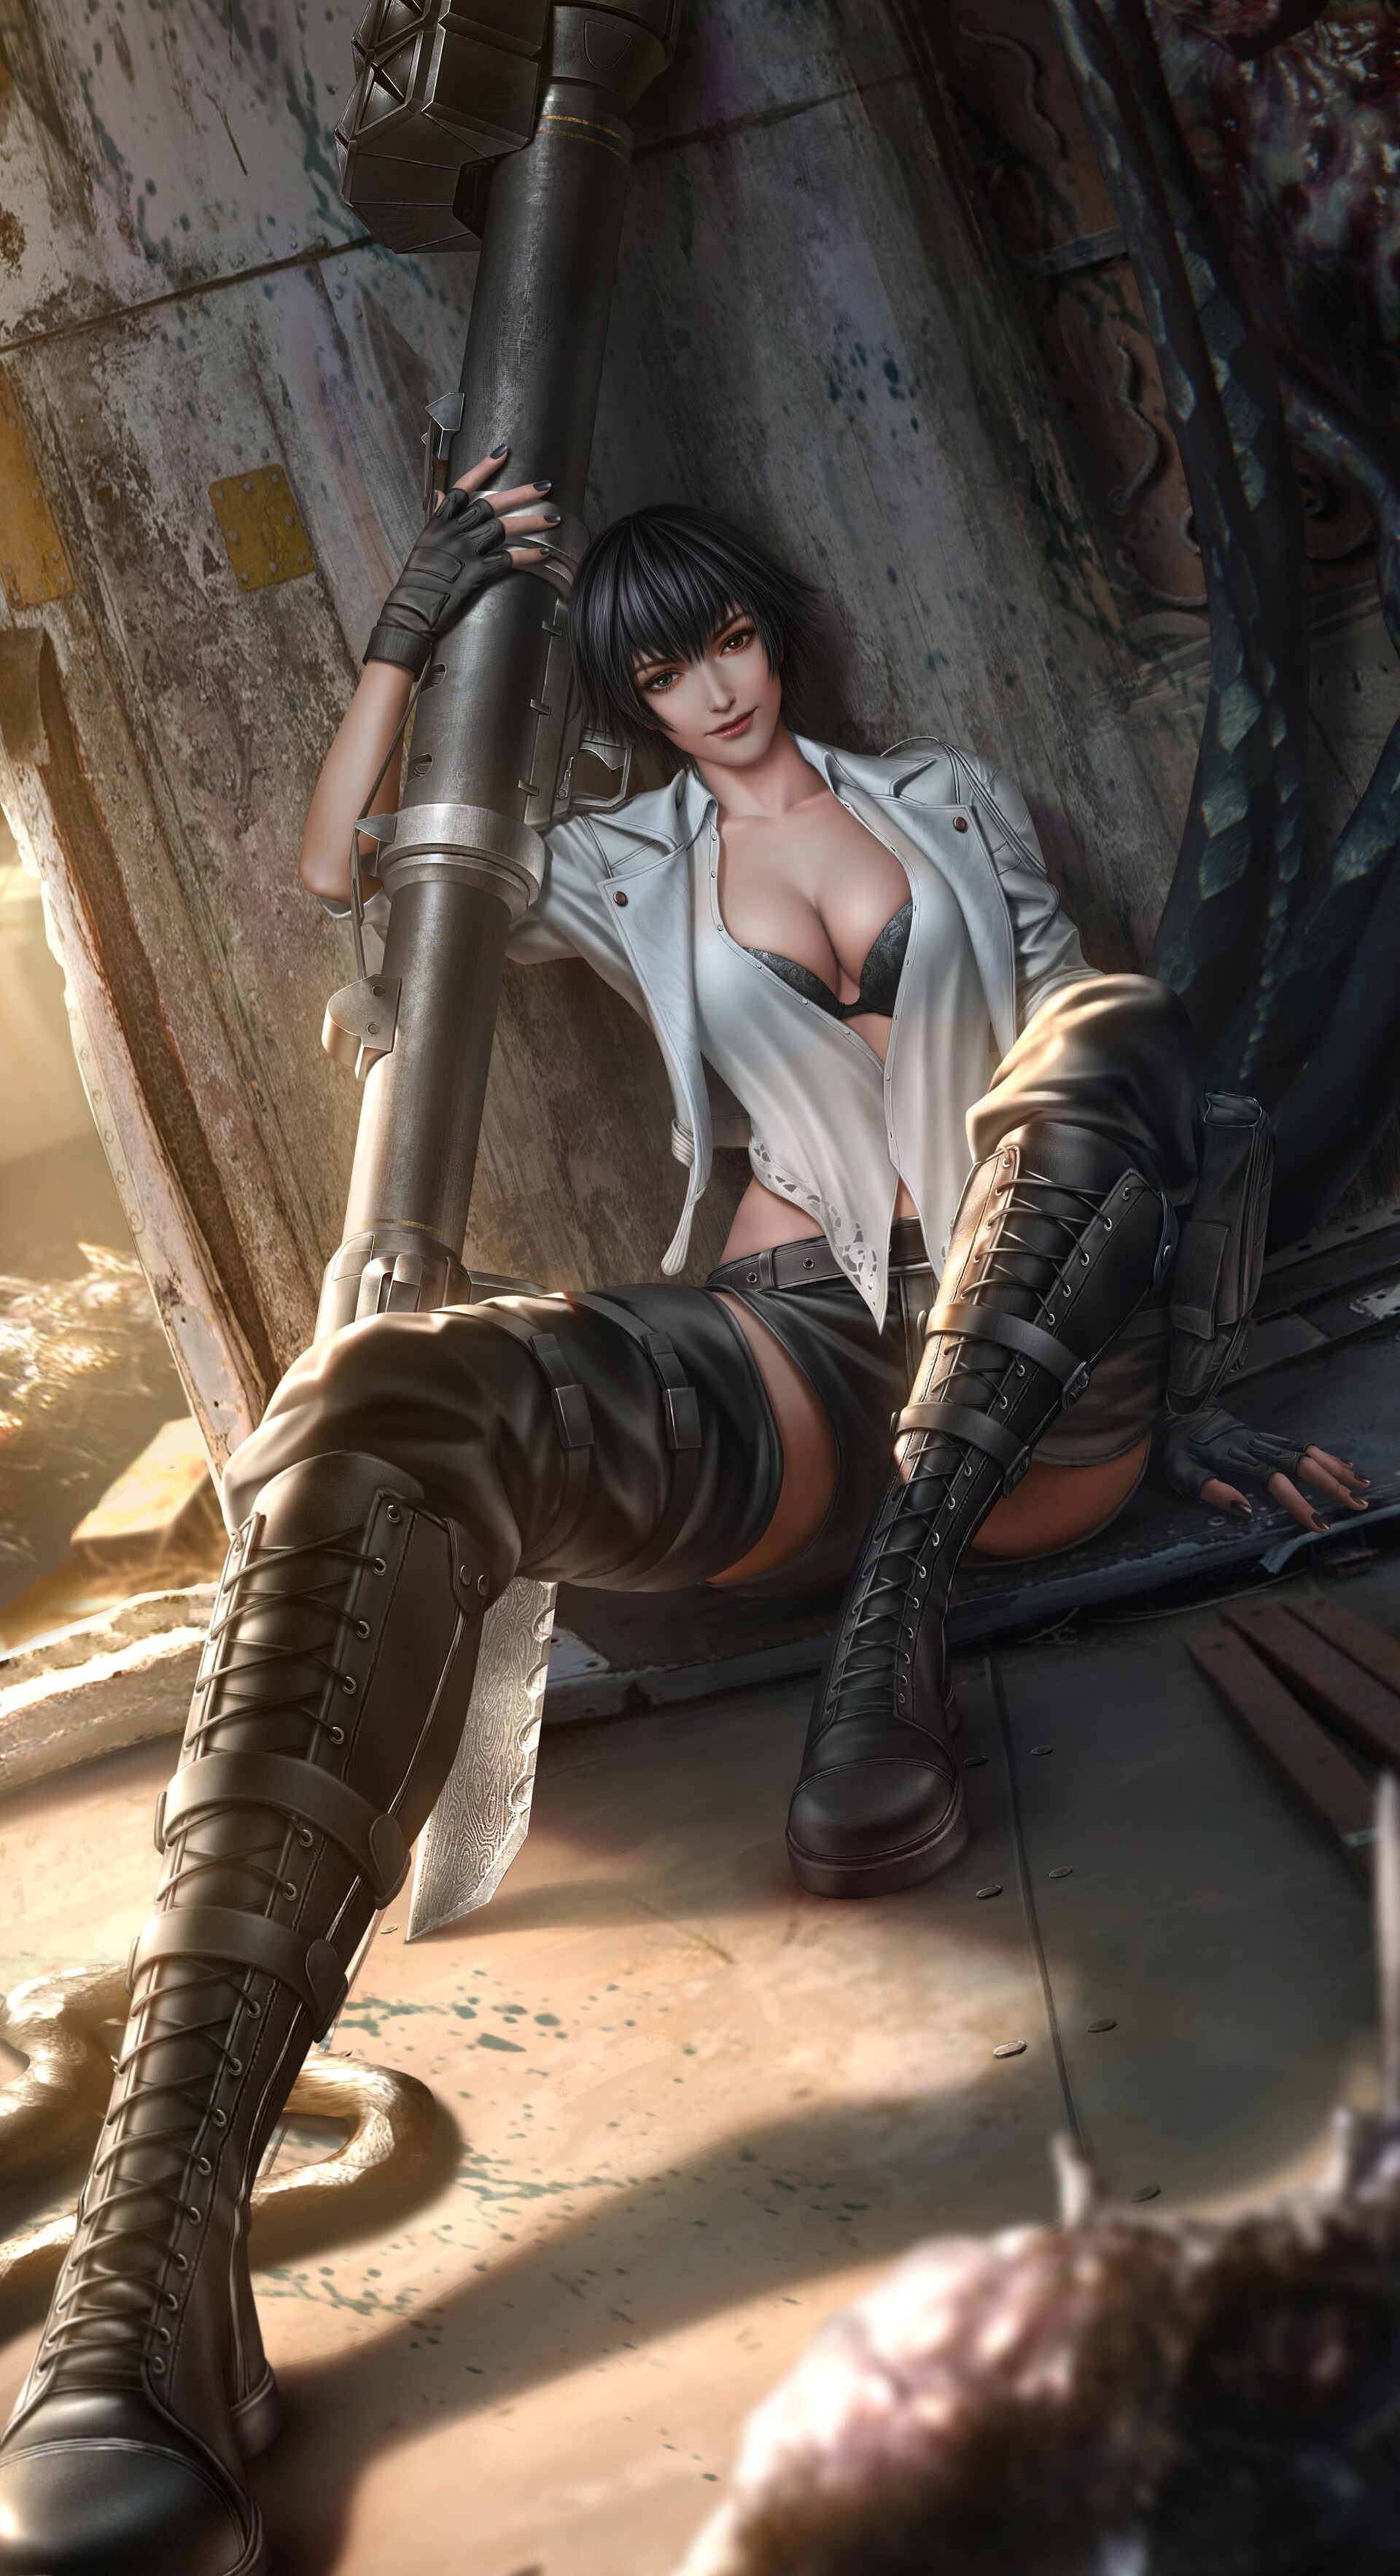 General 1920x3533 artwork women Asian rocket launchers cleavage boobs dark hair boots sitting legs Devil May Cry Lady (Devil May Cry) Cloud_D